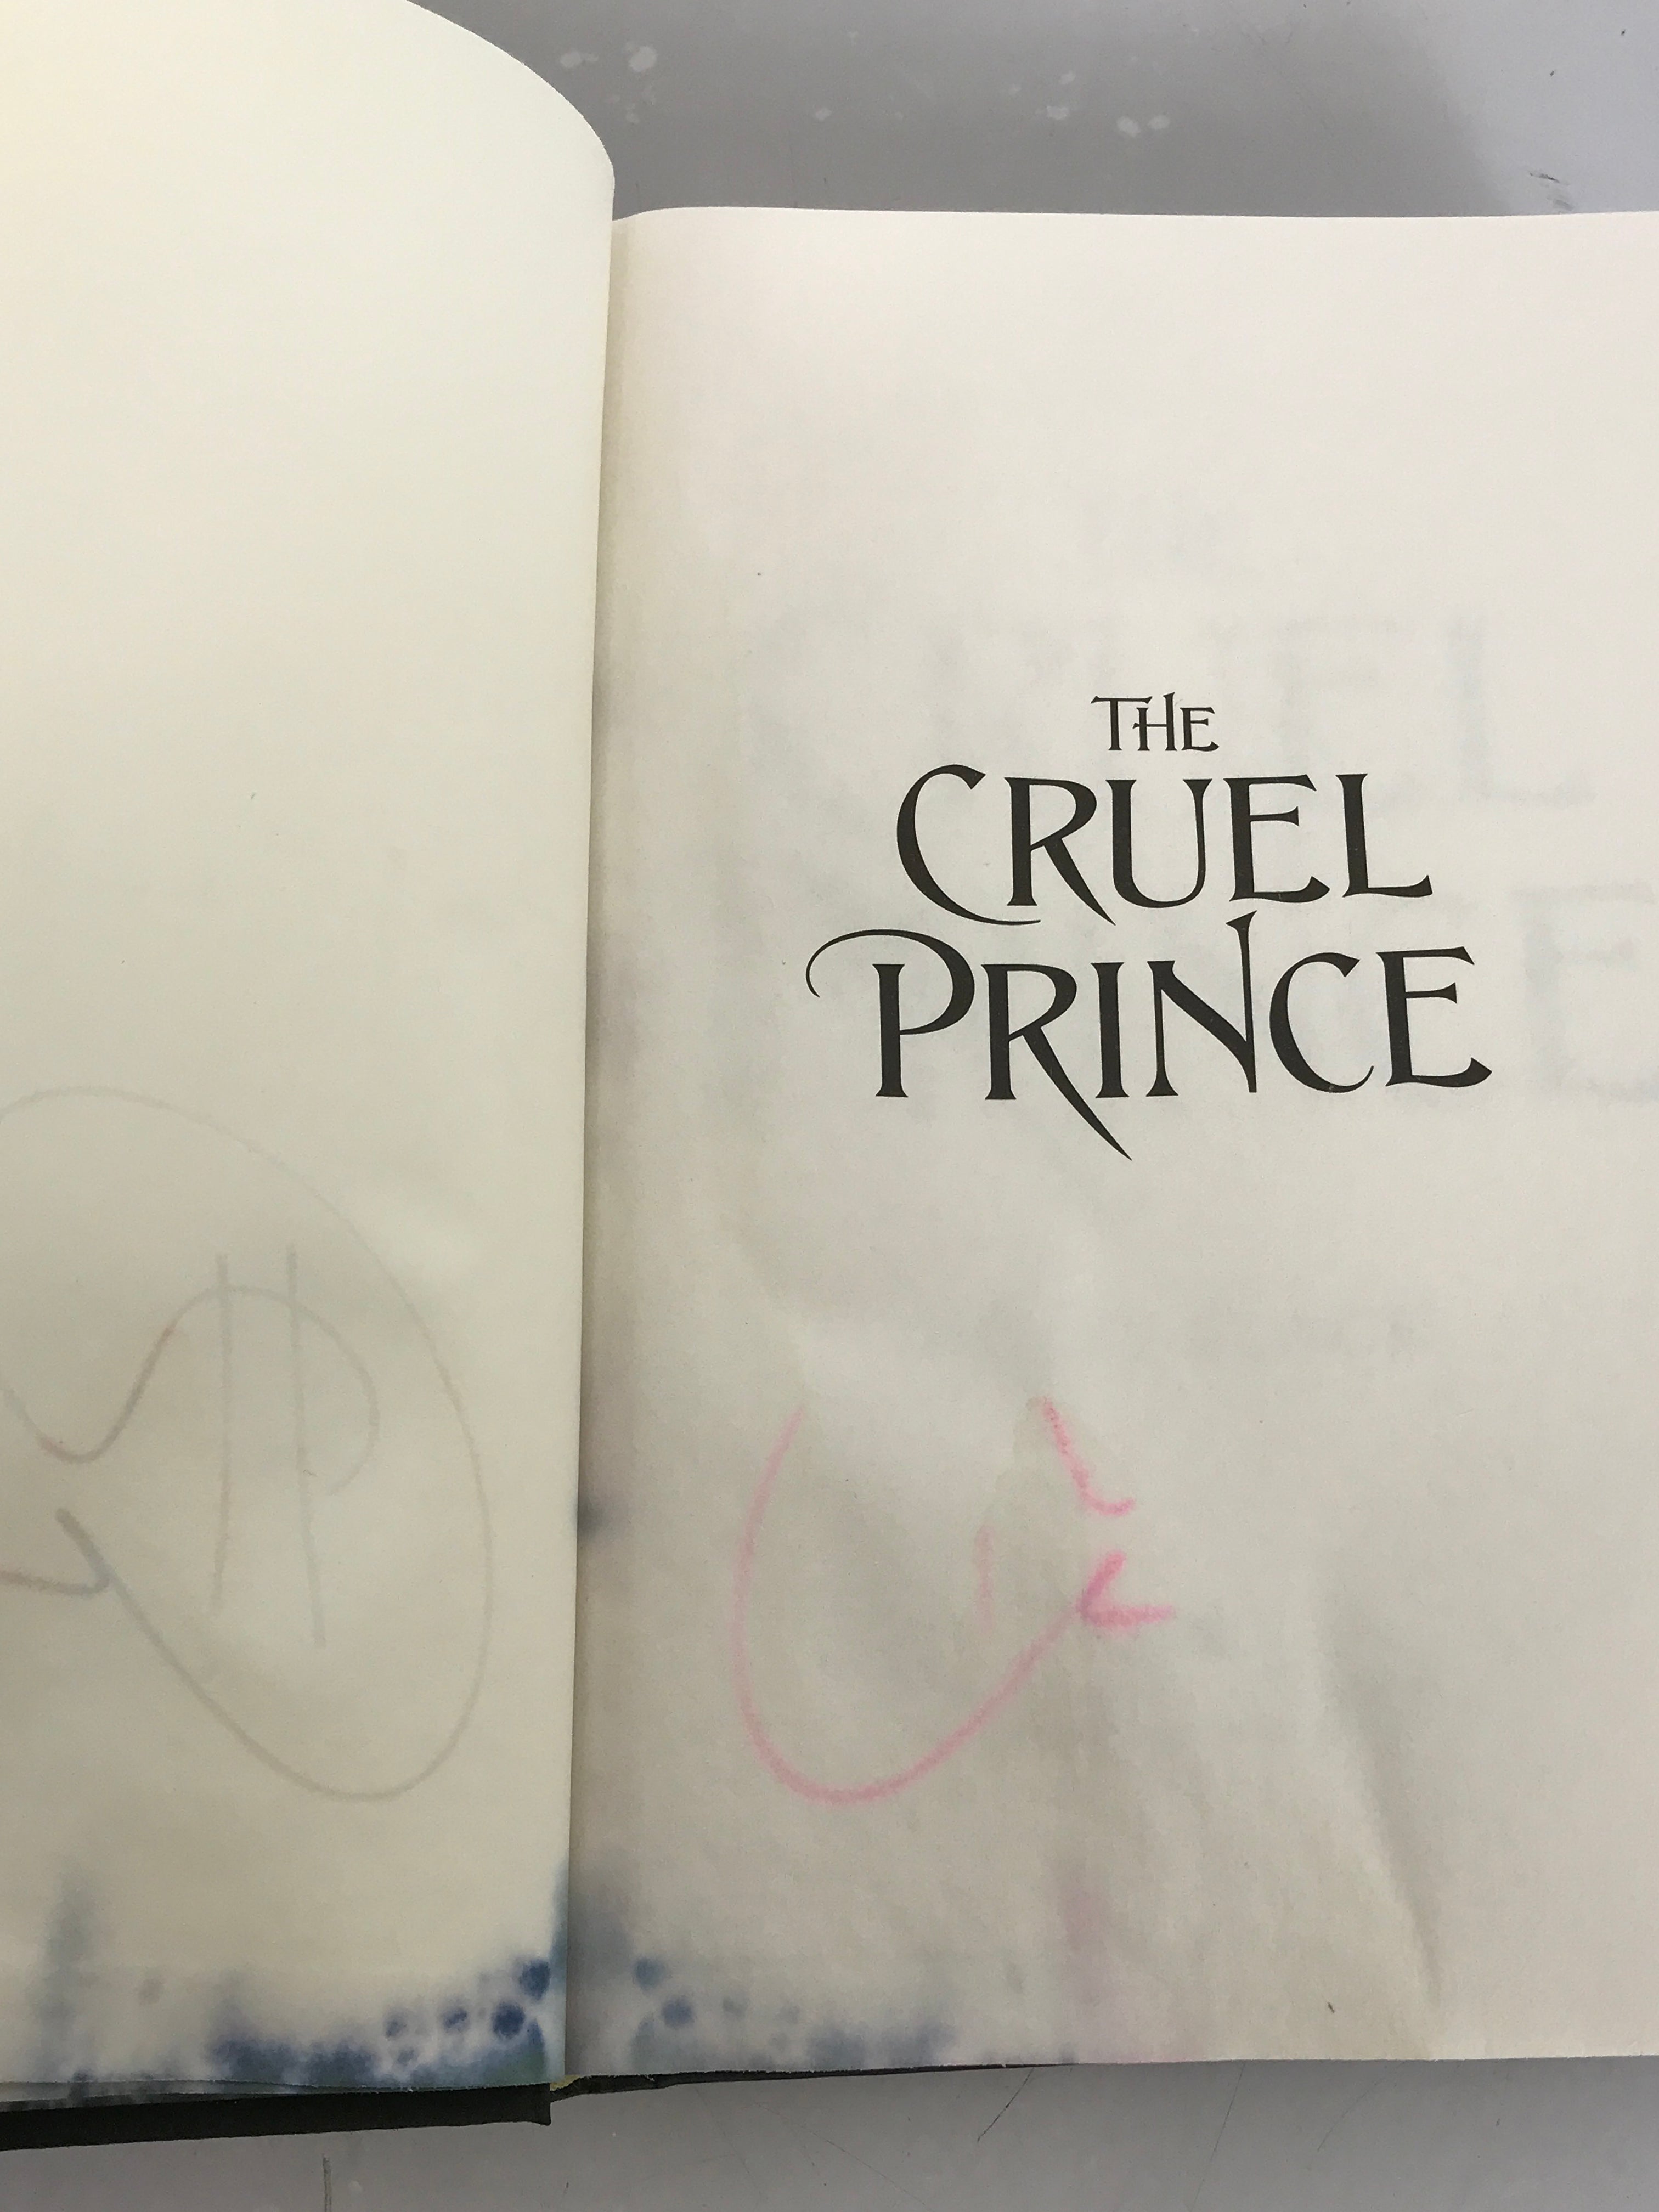 Owl Crate Edition of The Cruel Prince by Holly Black Signed 2018 HC DJ